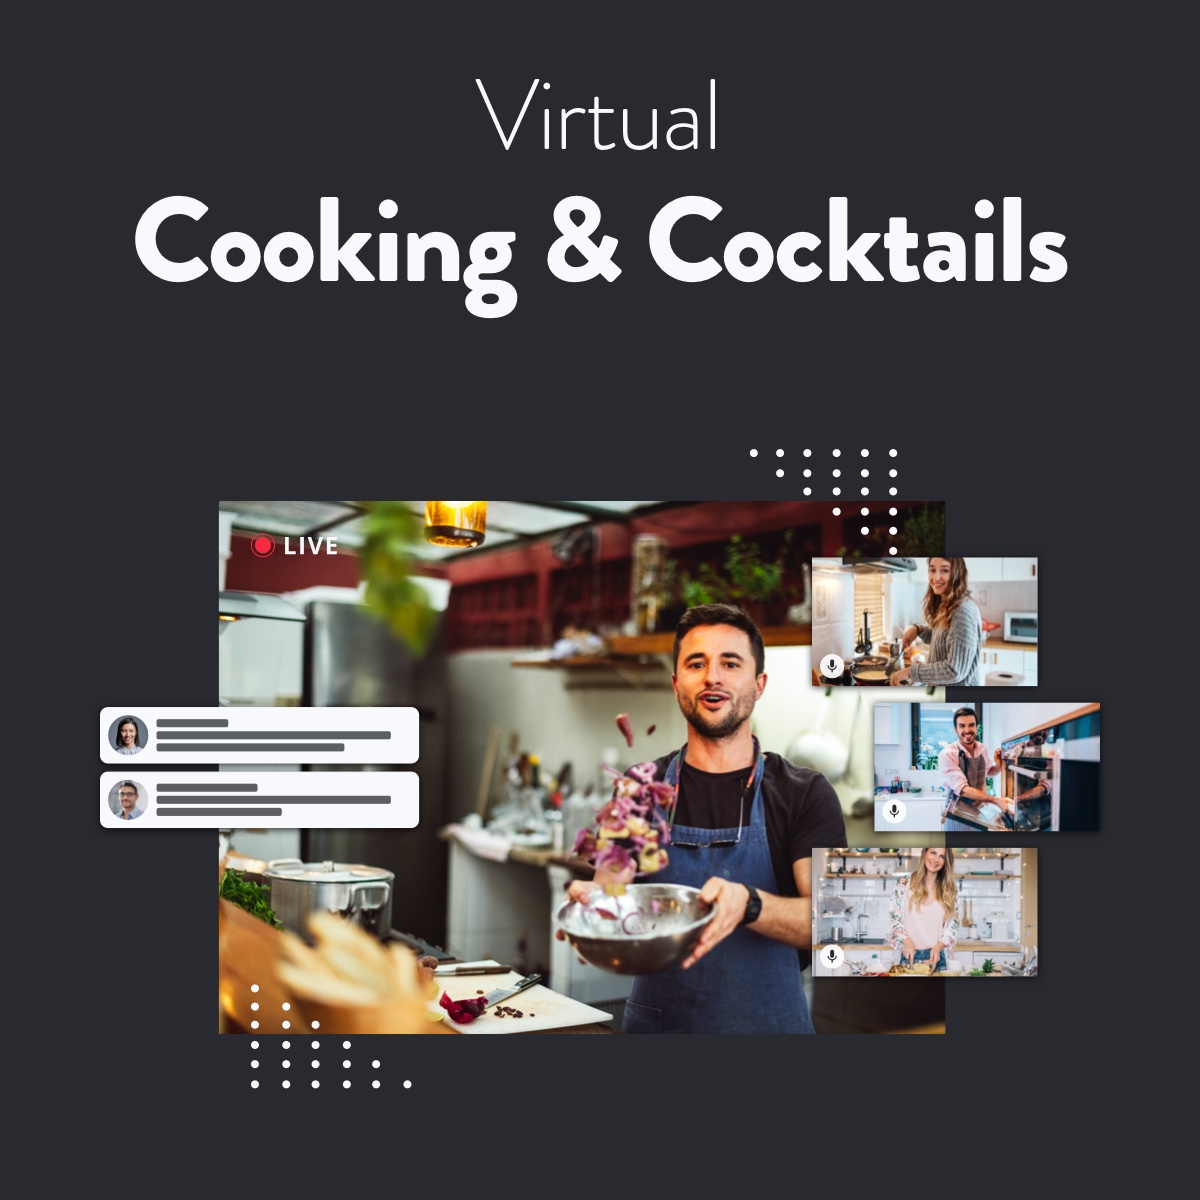 Cooking & Cocktails